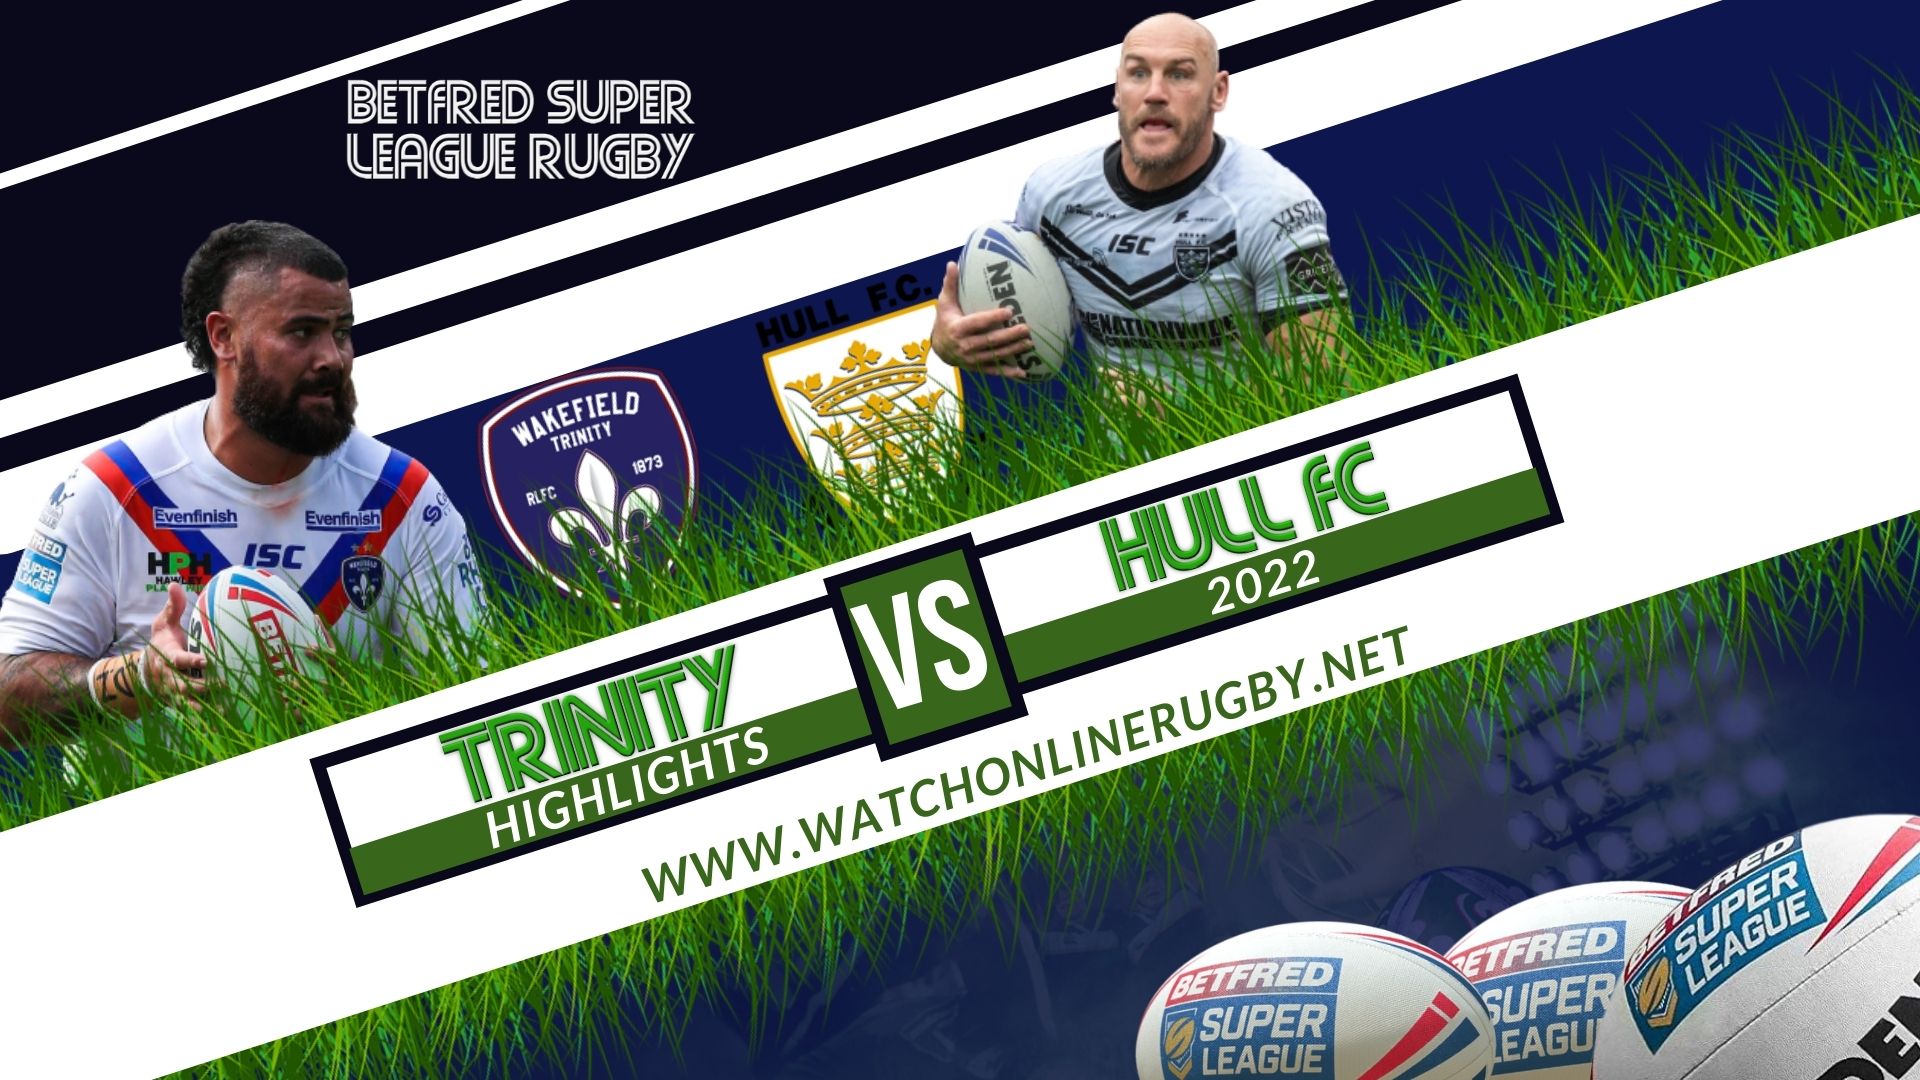 Wakefield Trinity Vs Hull FC Super League Rugby 2022 RD 1